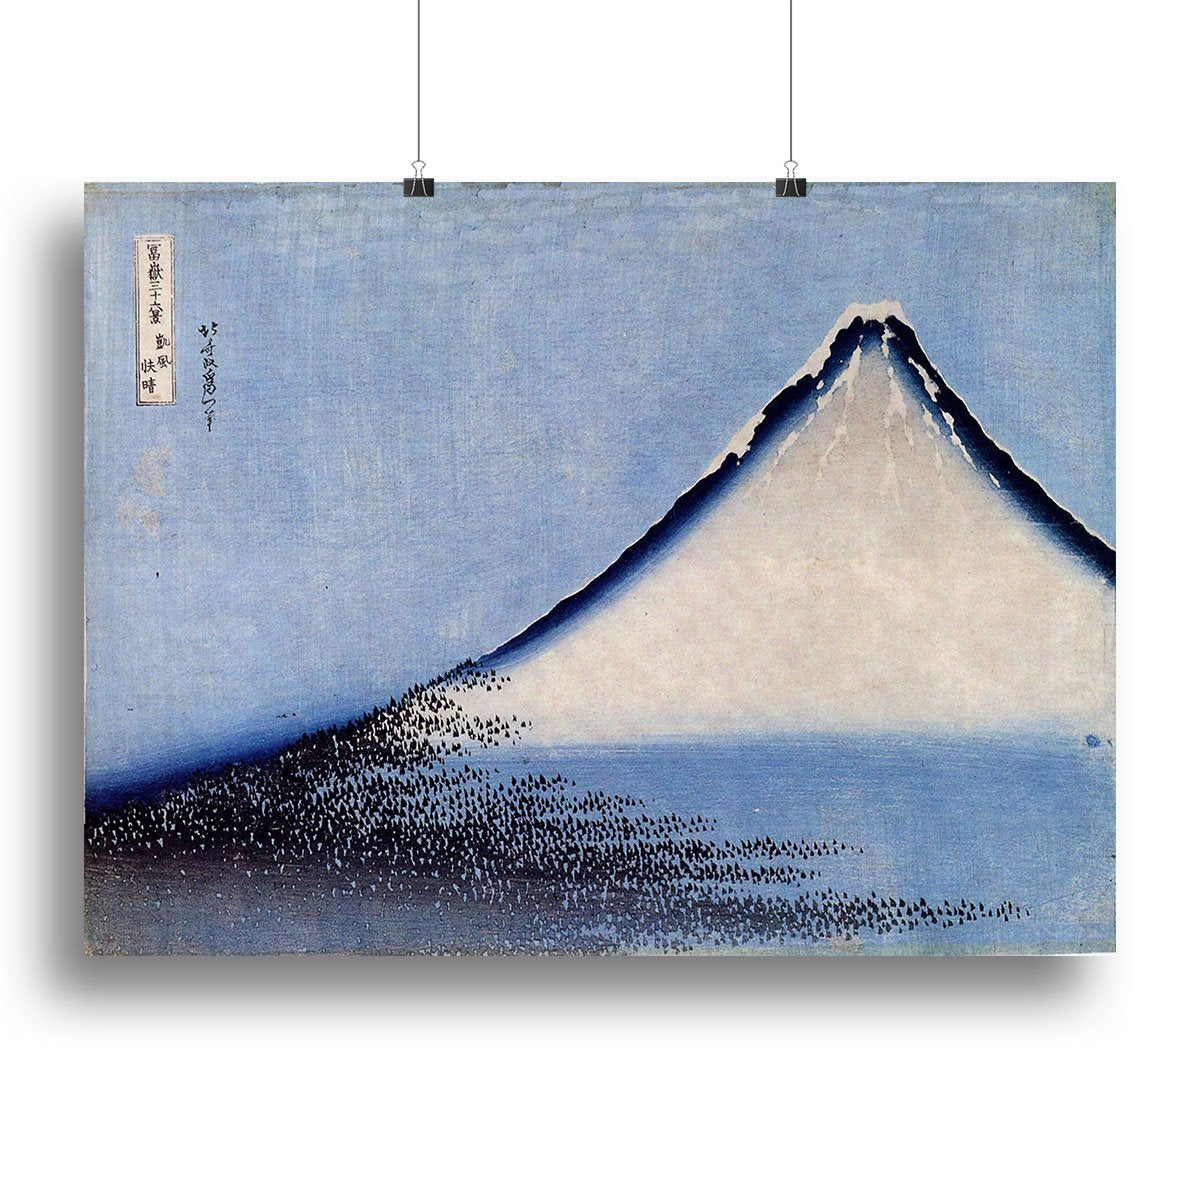 Mount Fuji 2 by Hokusai Canvas Print or Poster